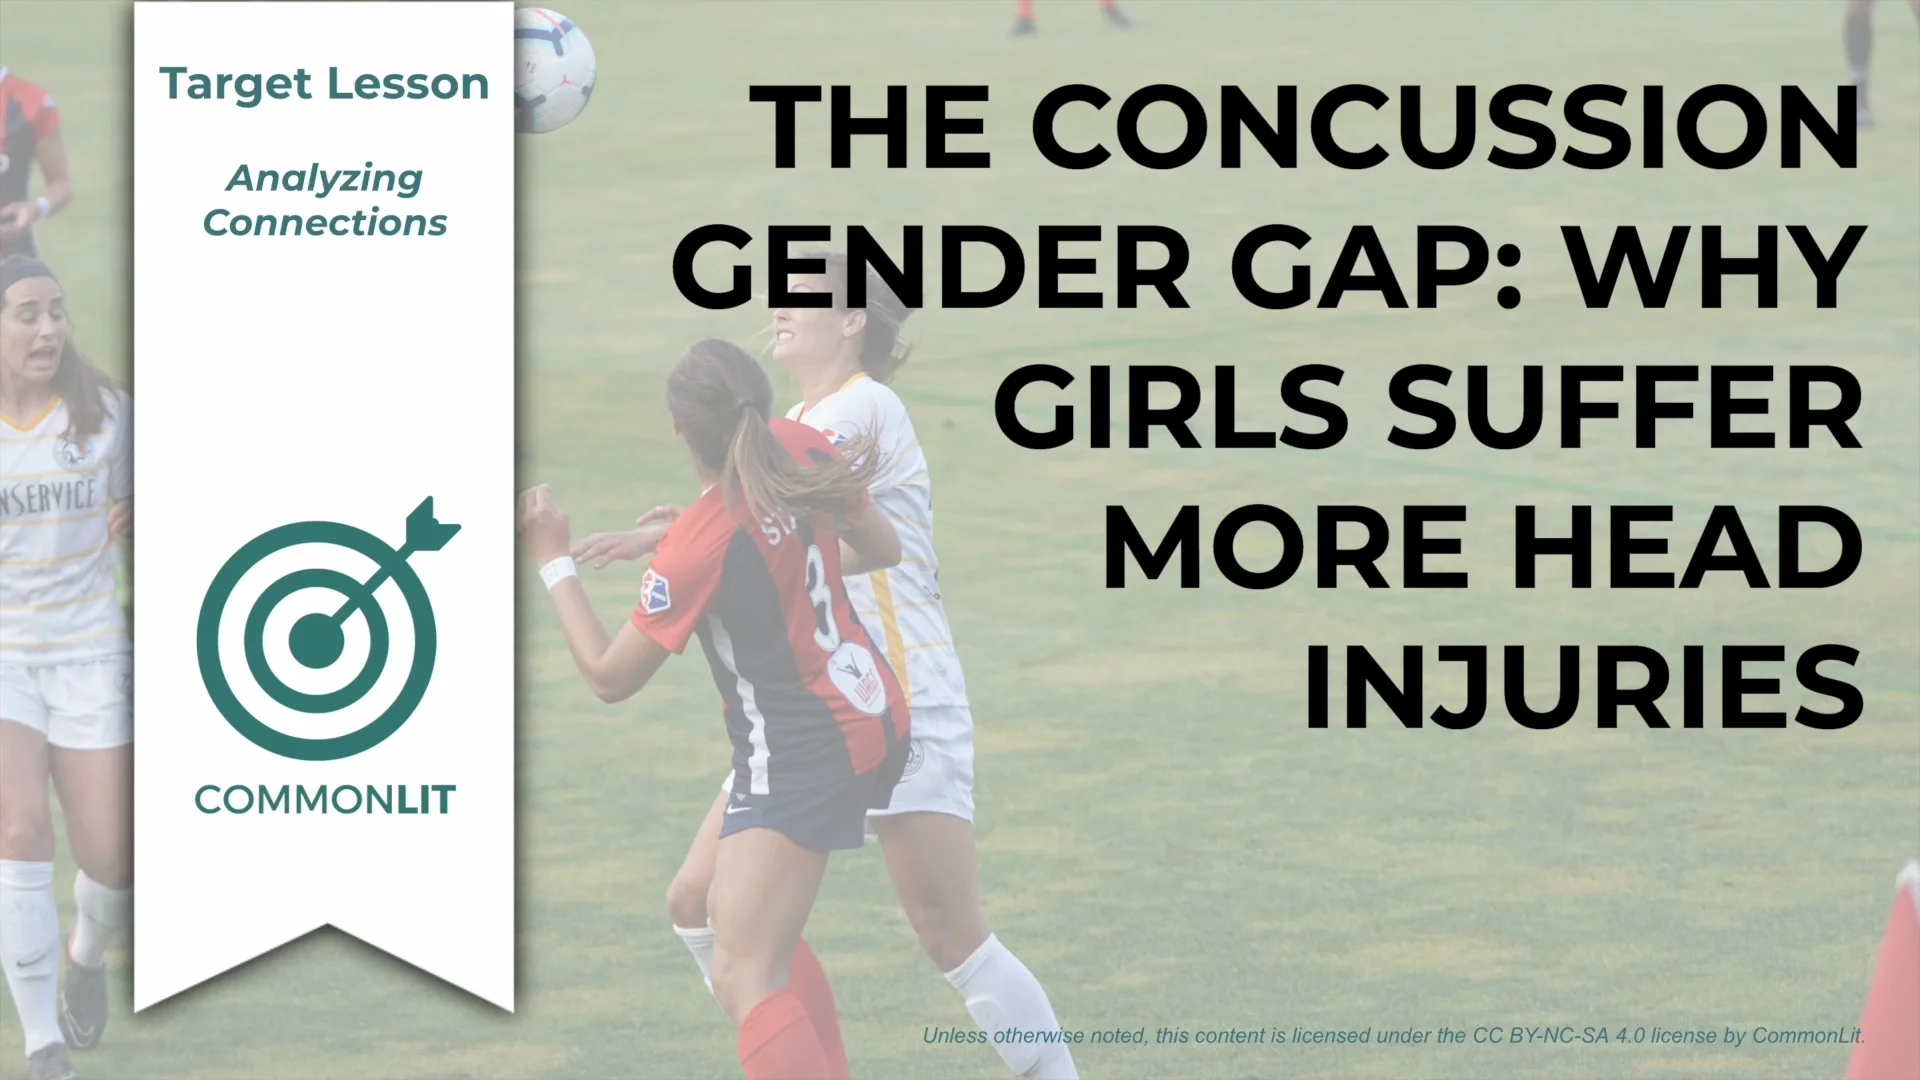 The Concussion Gender Gap: Why Girls Suffer More Head Injuries